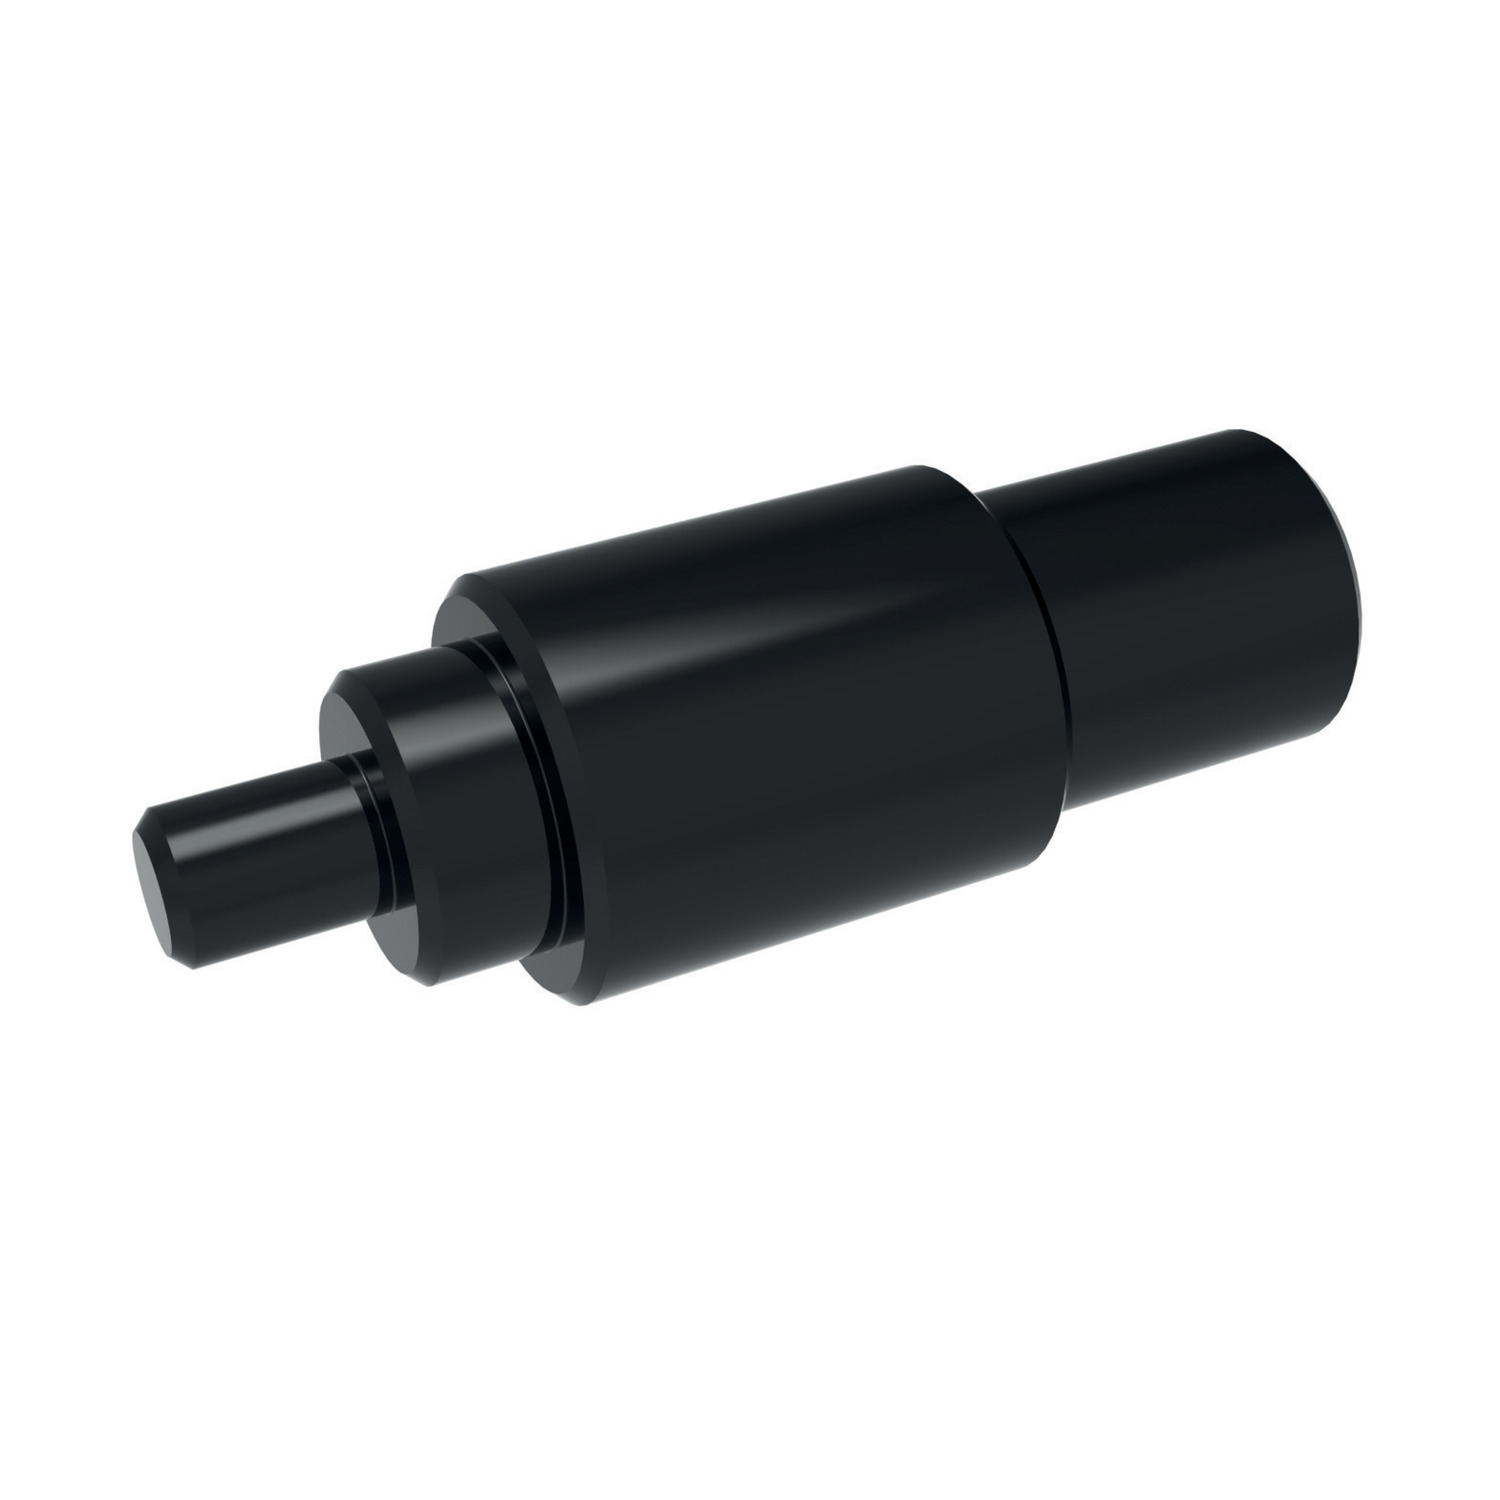 Installation Tool - Inch - Heavy Duty For threaded inserts 22010 and 22012.